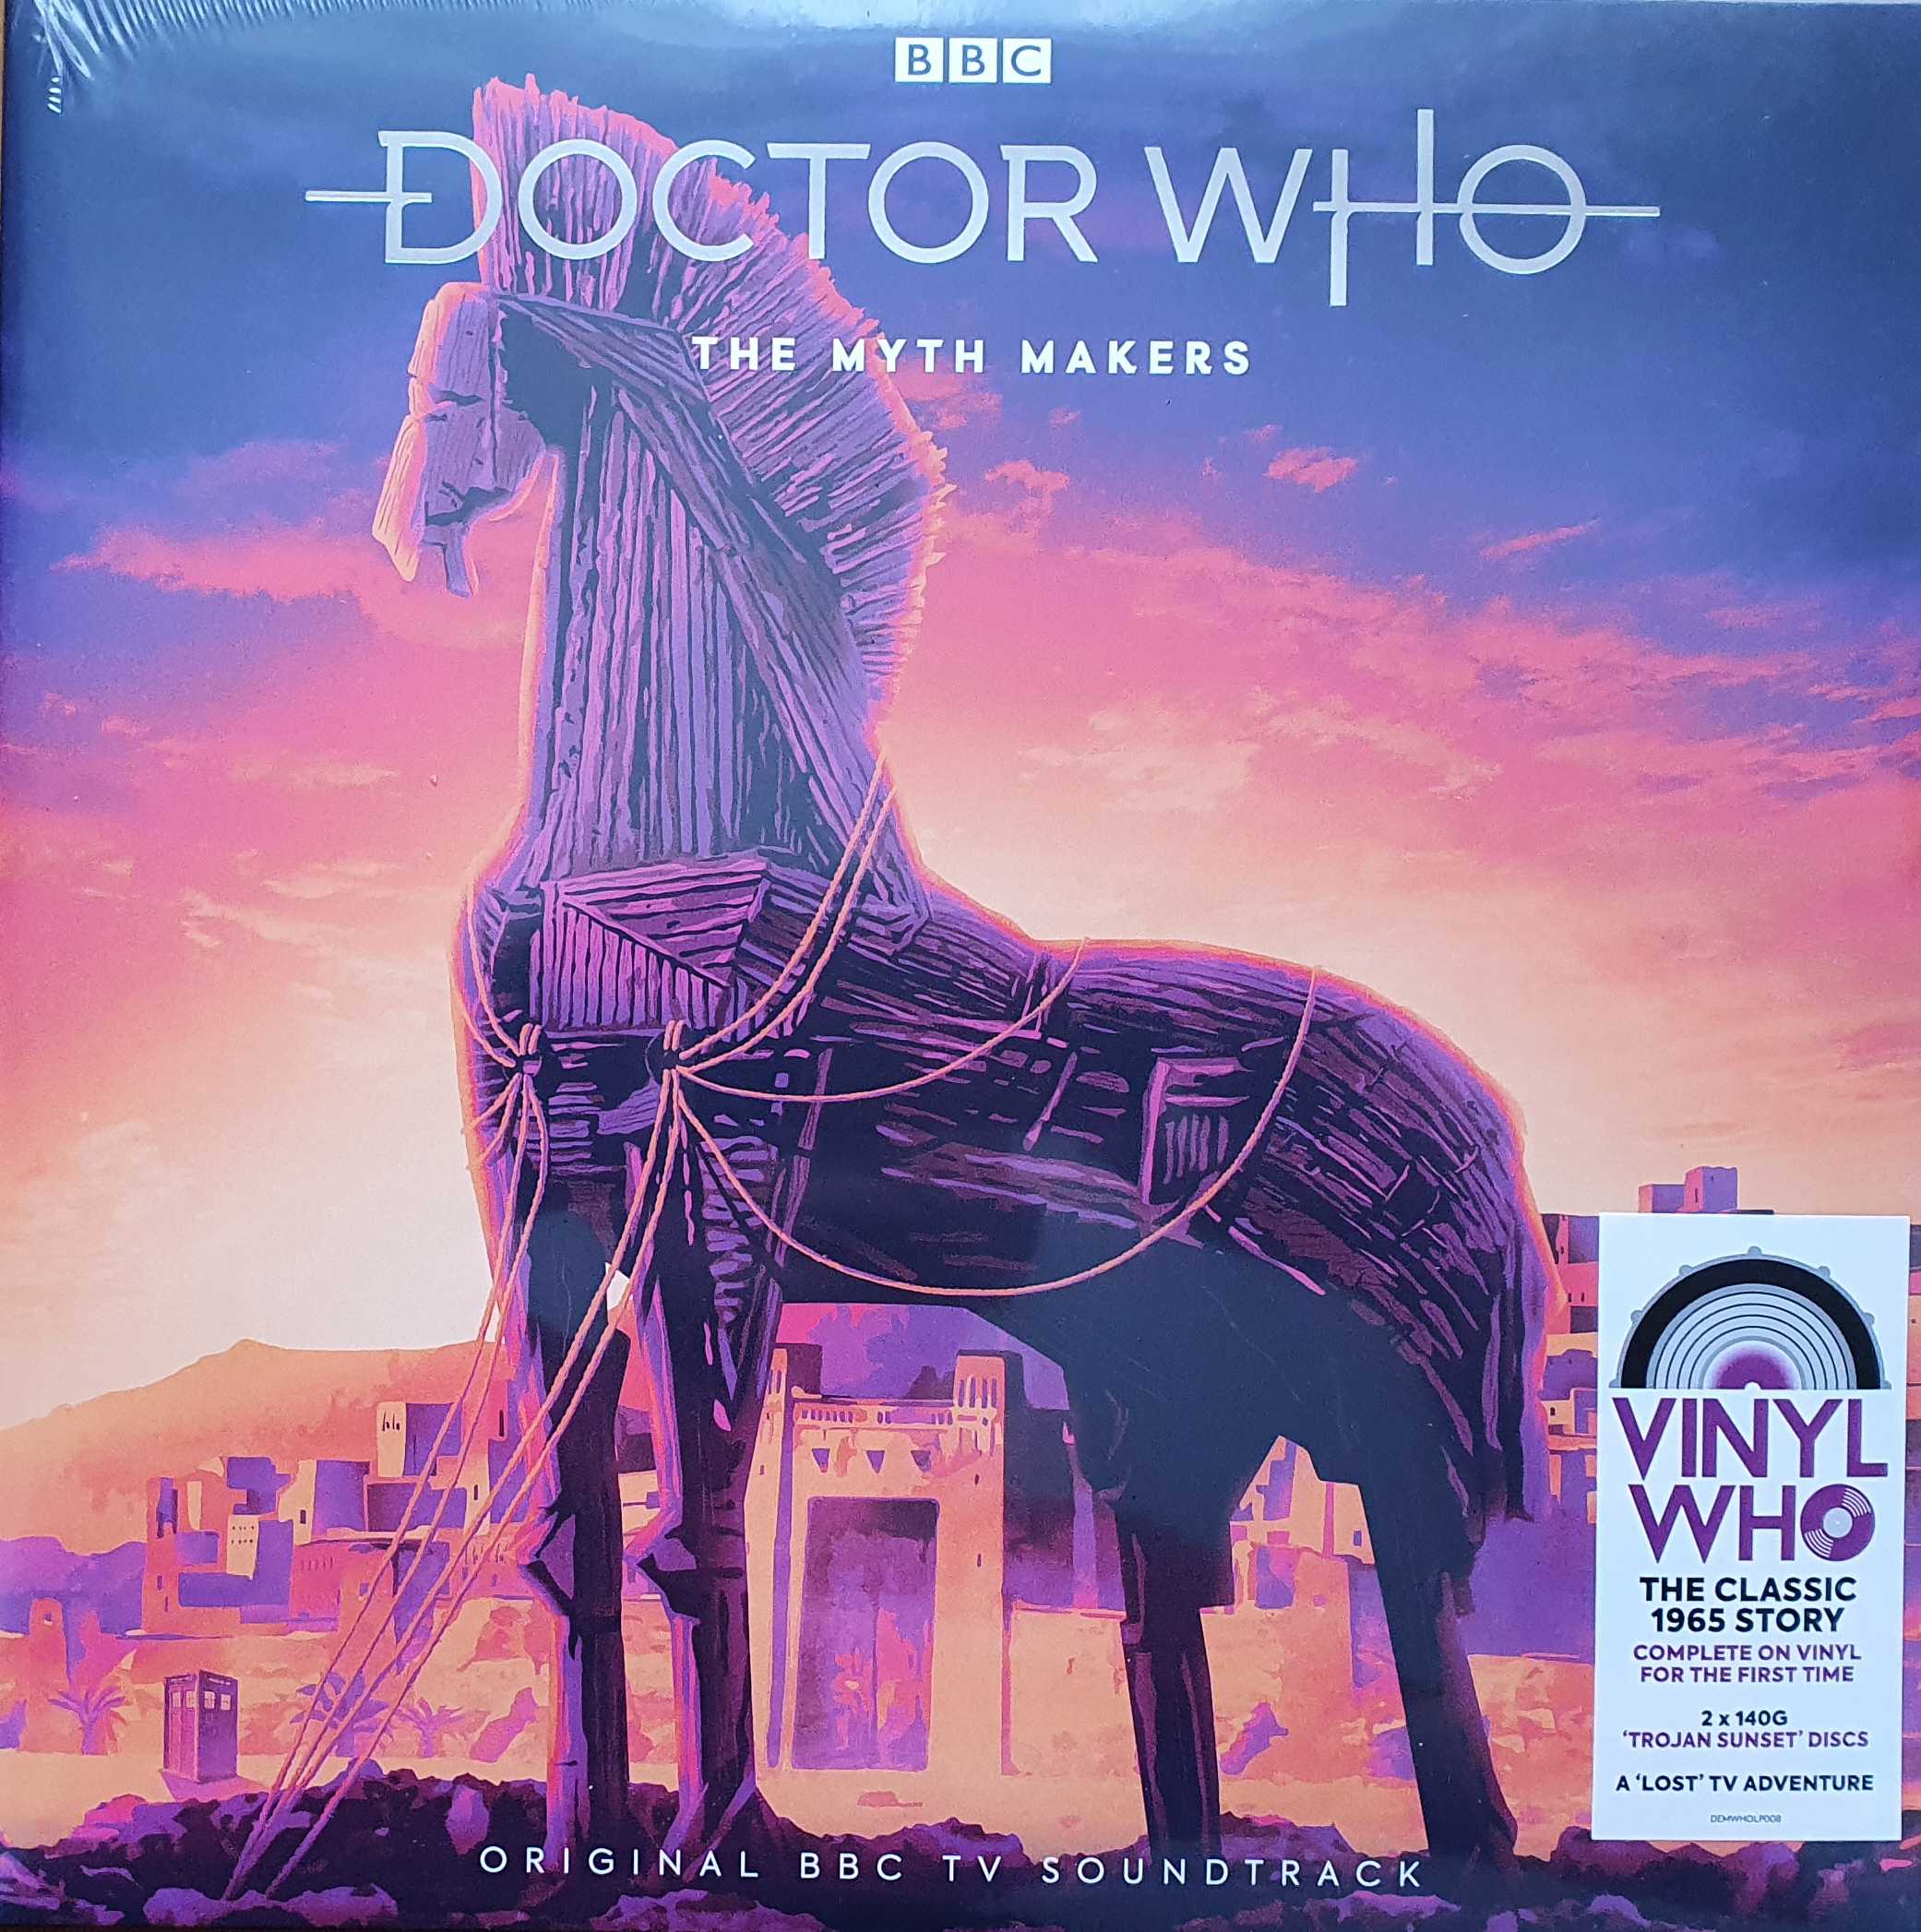 Picture of DEMWHOLP008 Doctor Who - The Myth Makers by artist Donald Cotton from the BBC records and Tapes library